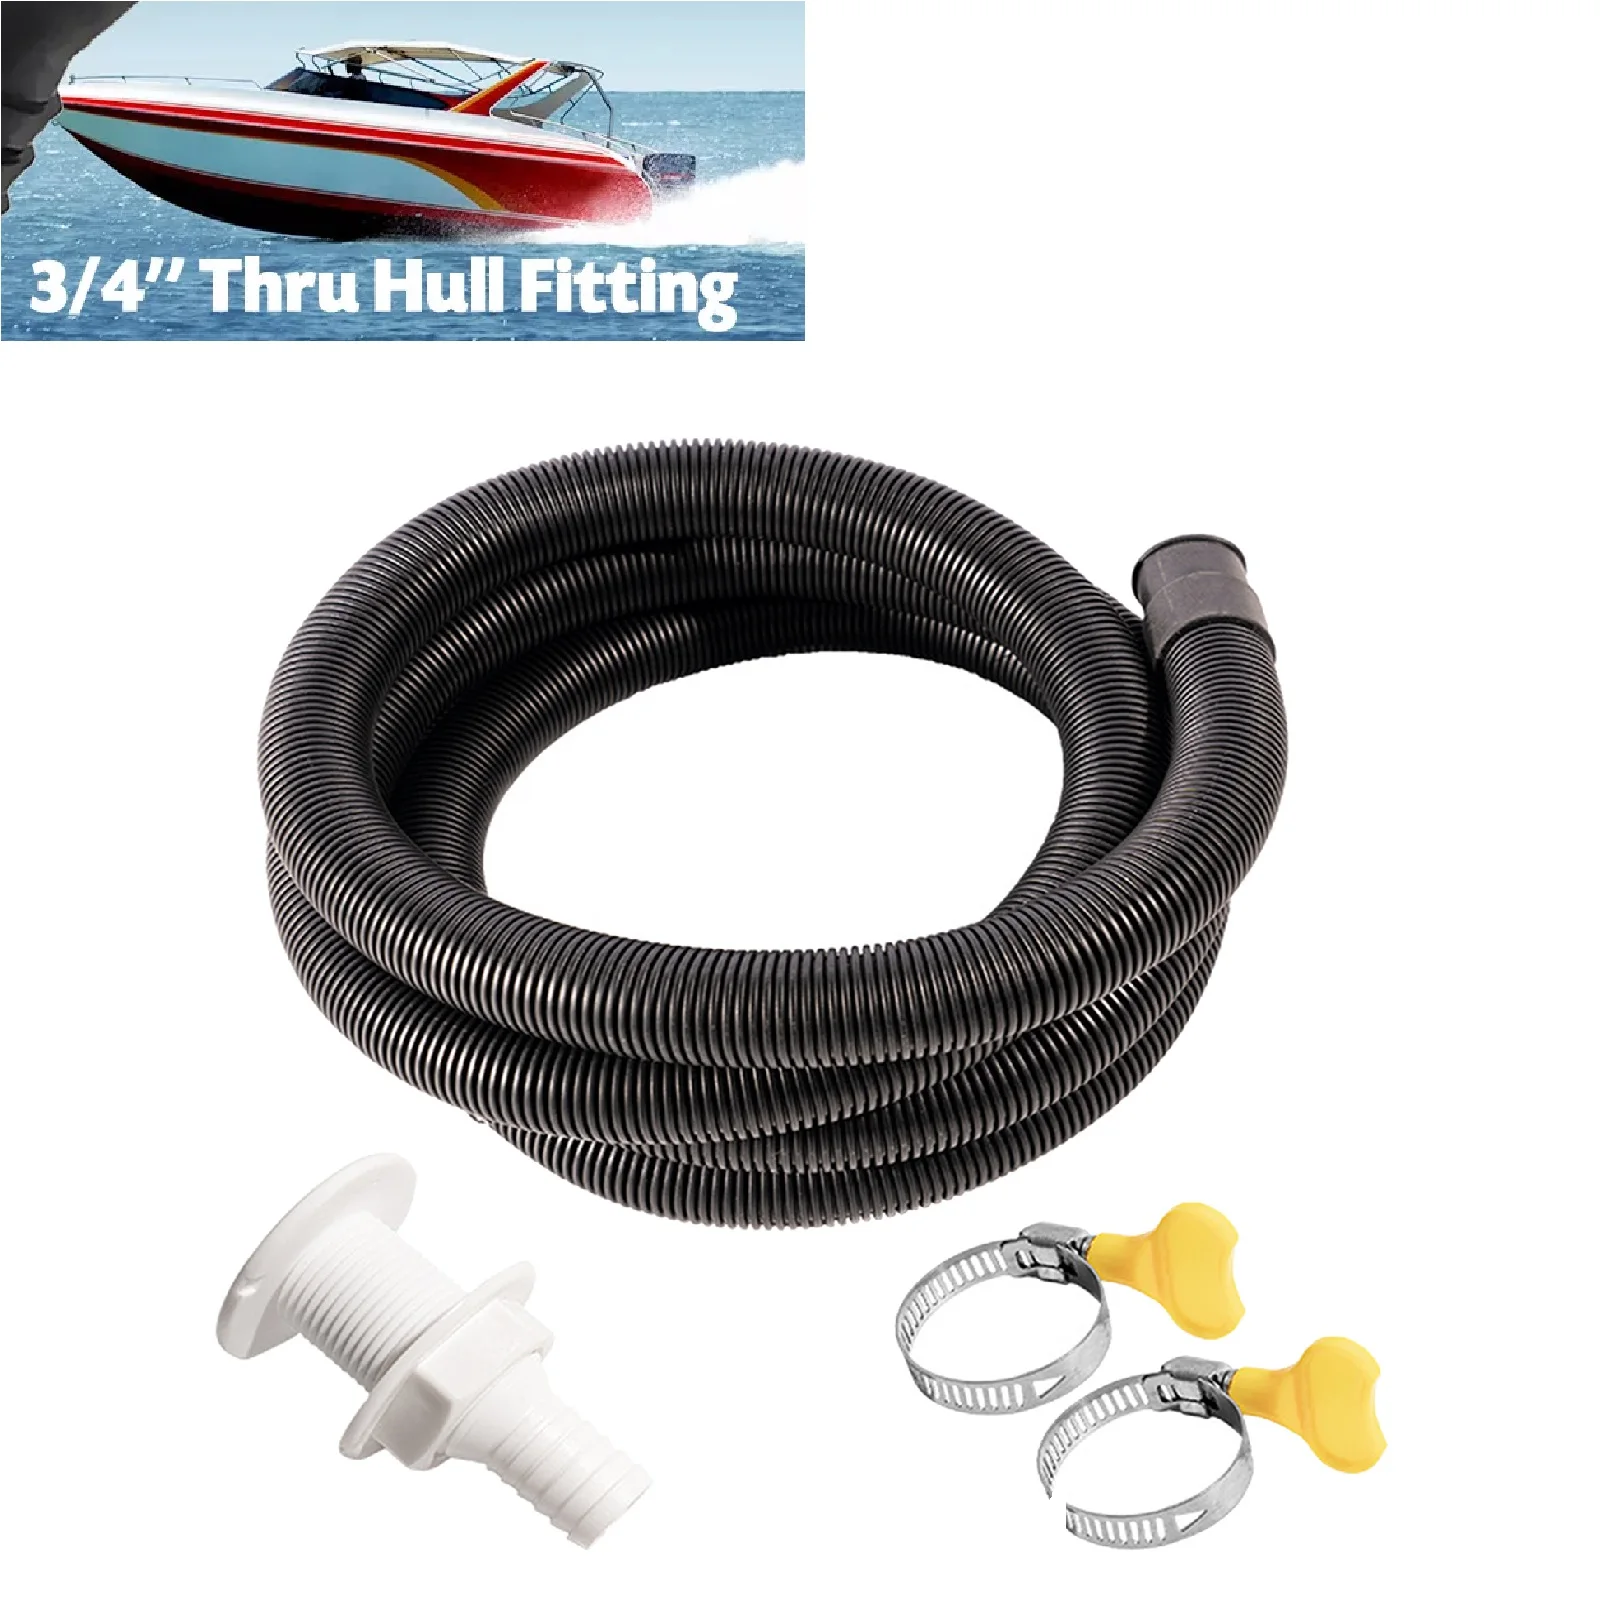 Flexible Bilge Pump Hose Installation Kit 3/4-Inch Diameter 6.6 FT for Boats with 2 Clamps and Thru-Hull Fitting